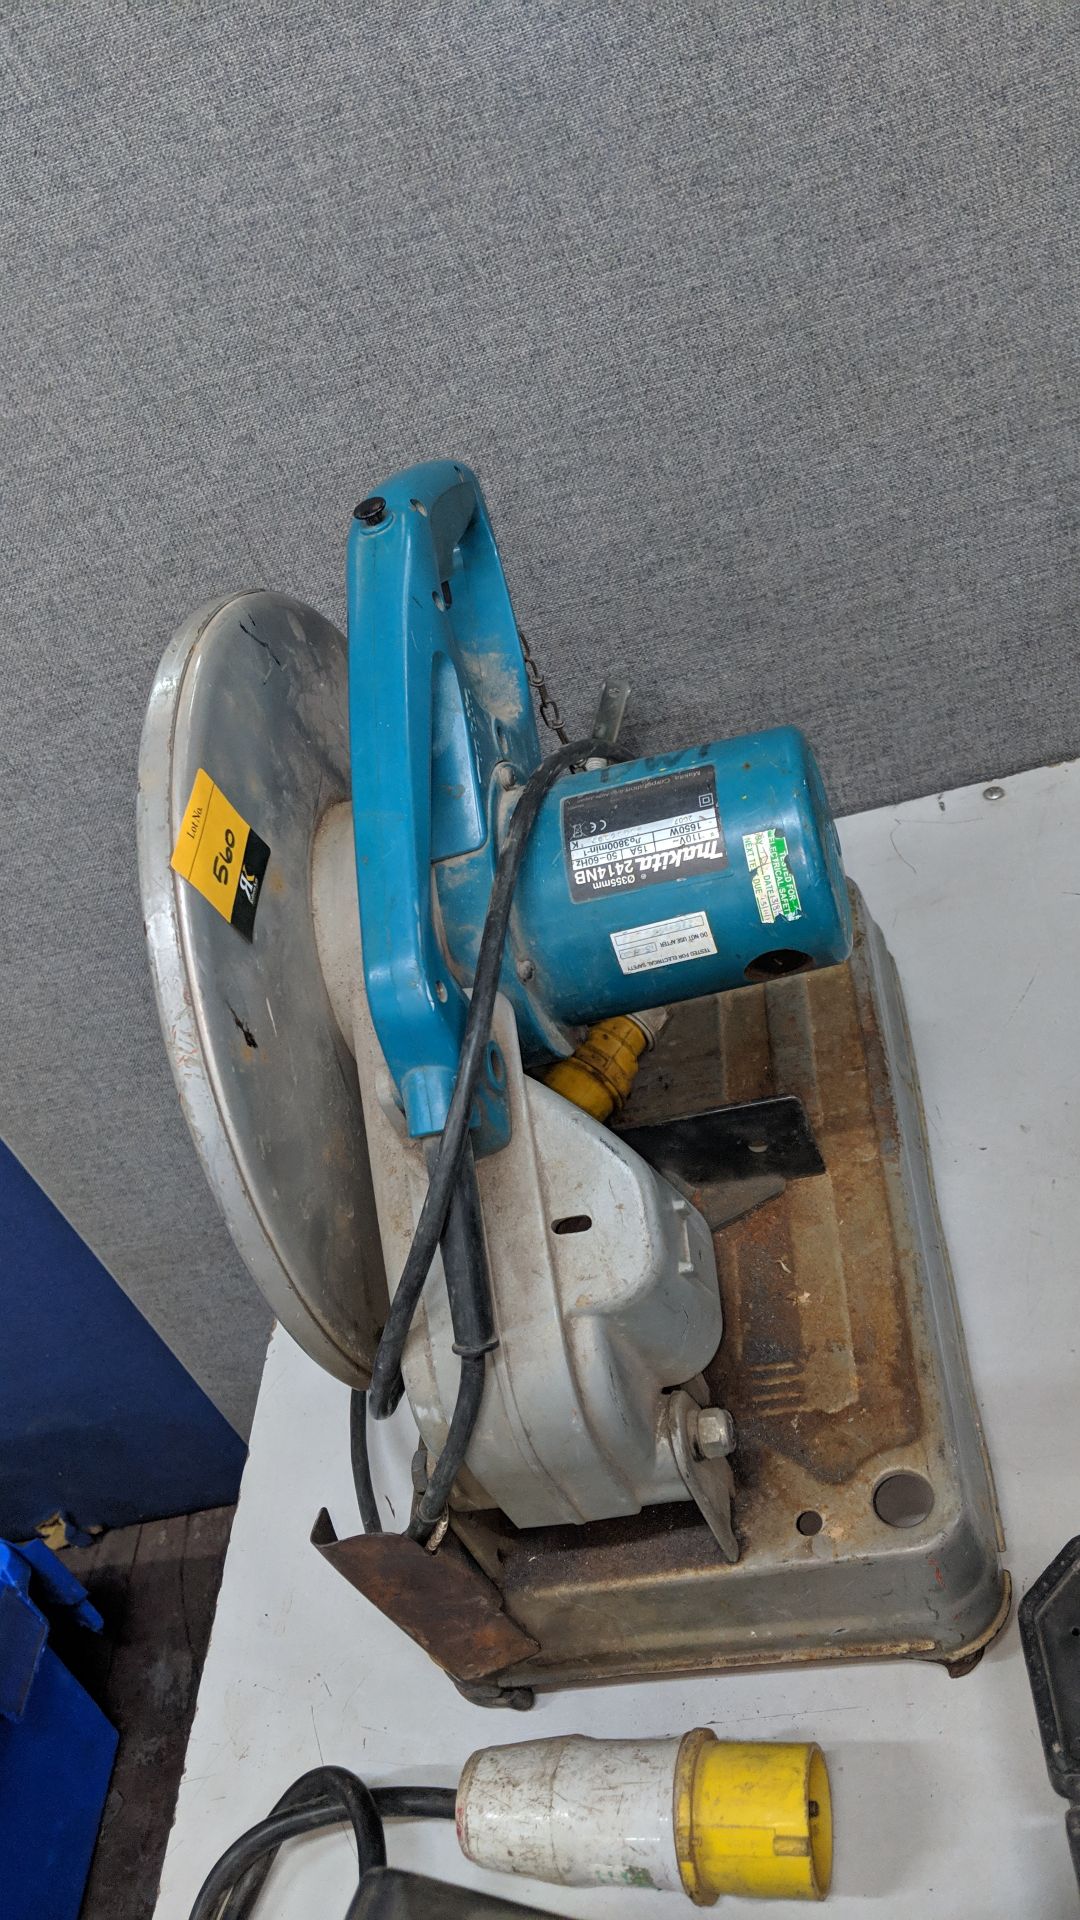 Makita 110v pull down chop saw model 2414NB This is one of a number of lots being sold on behalf - Image 3 of 5